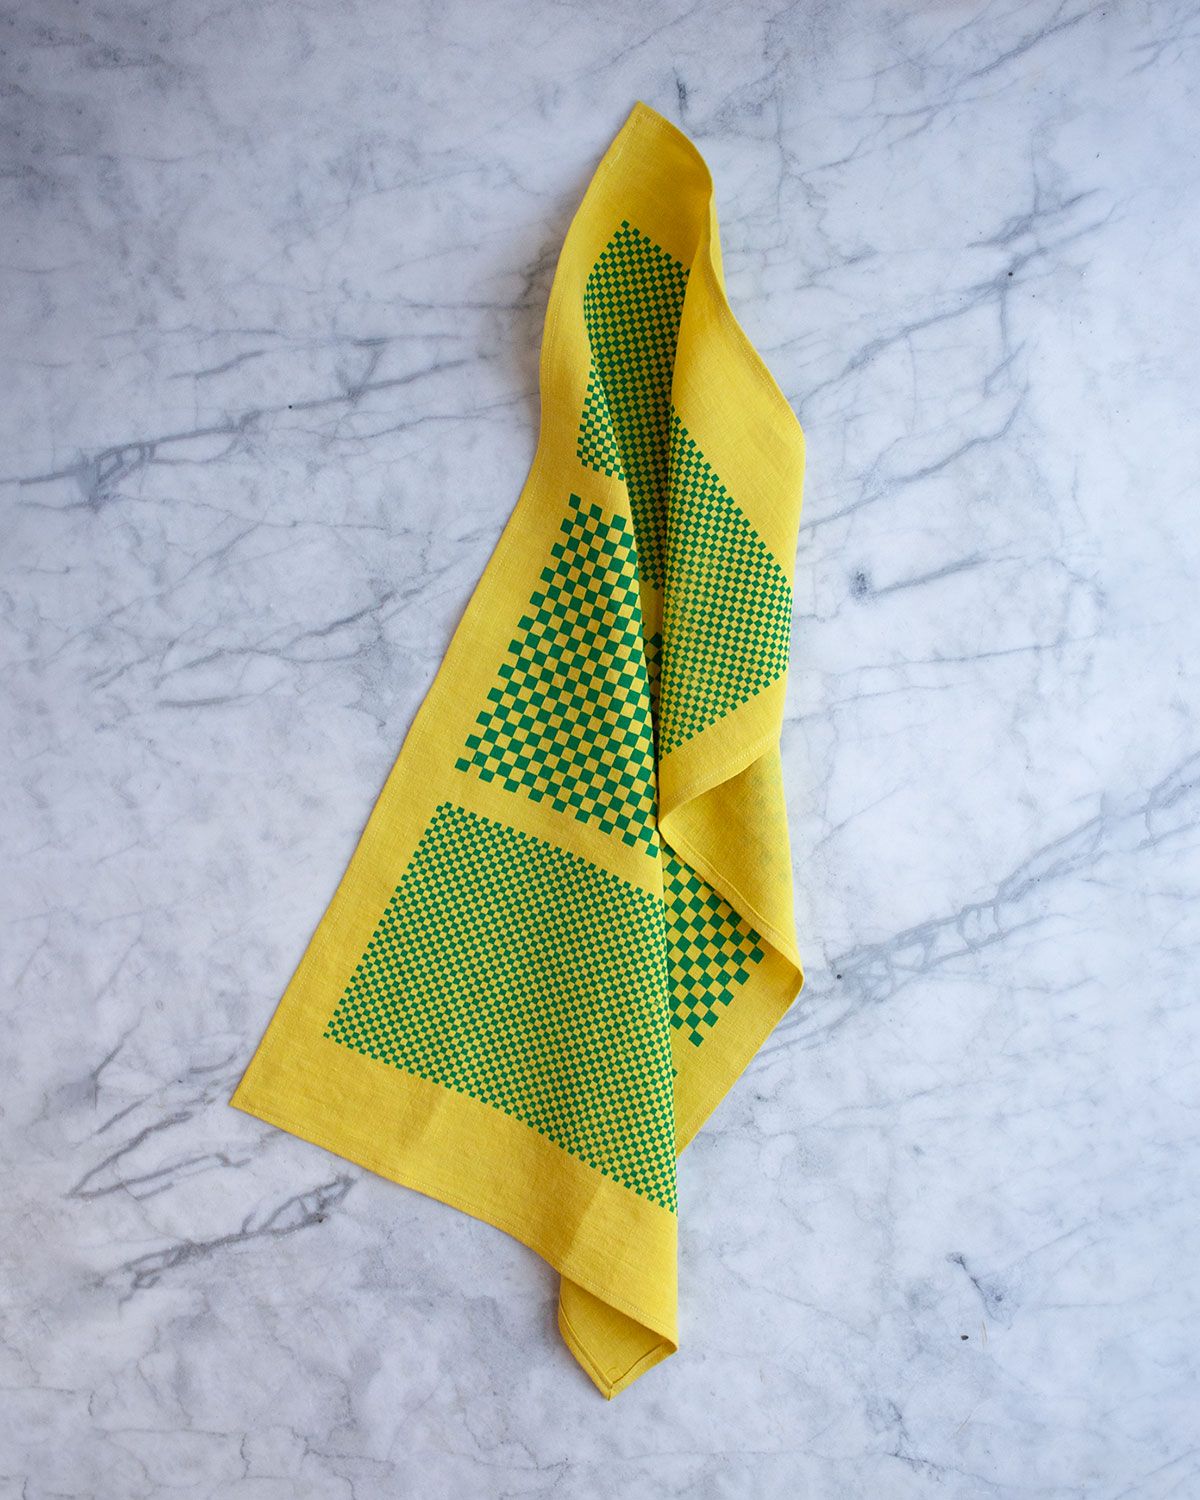 "Acid green" tea towel is shown gently tousled atop a marble surface.